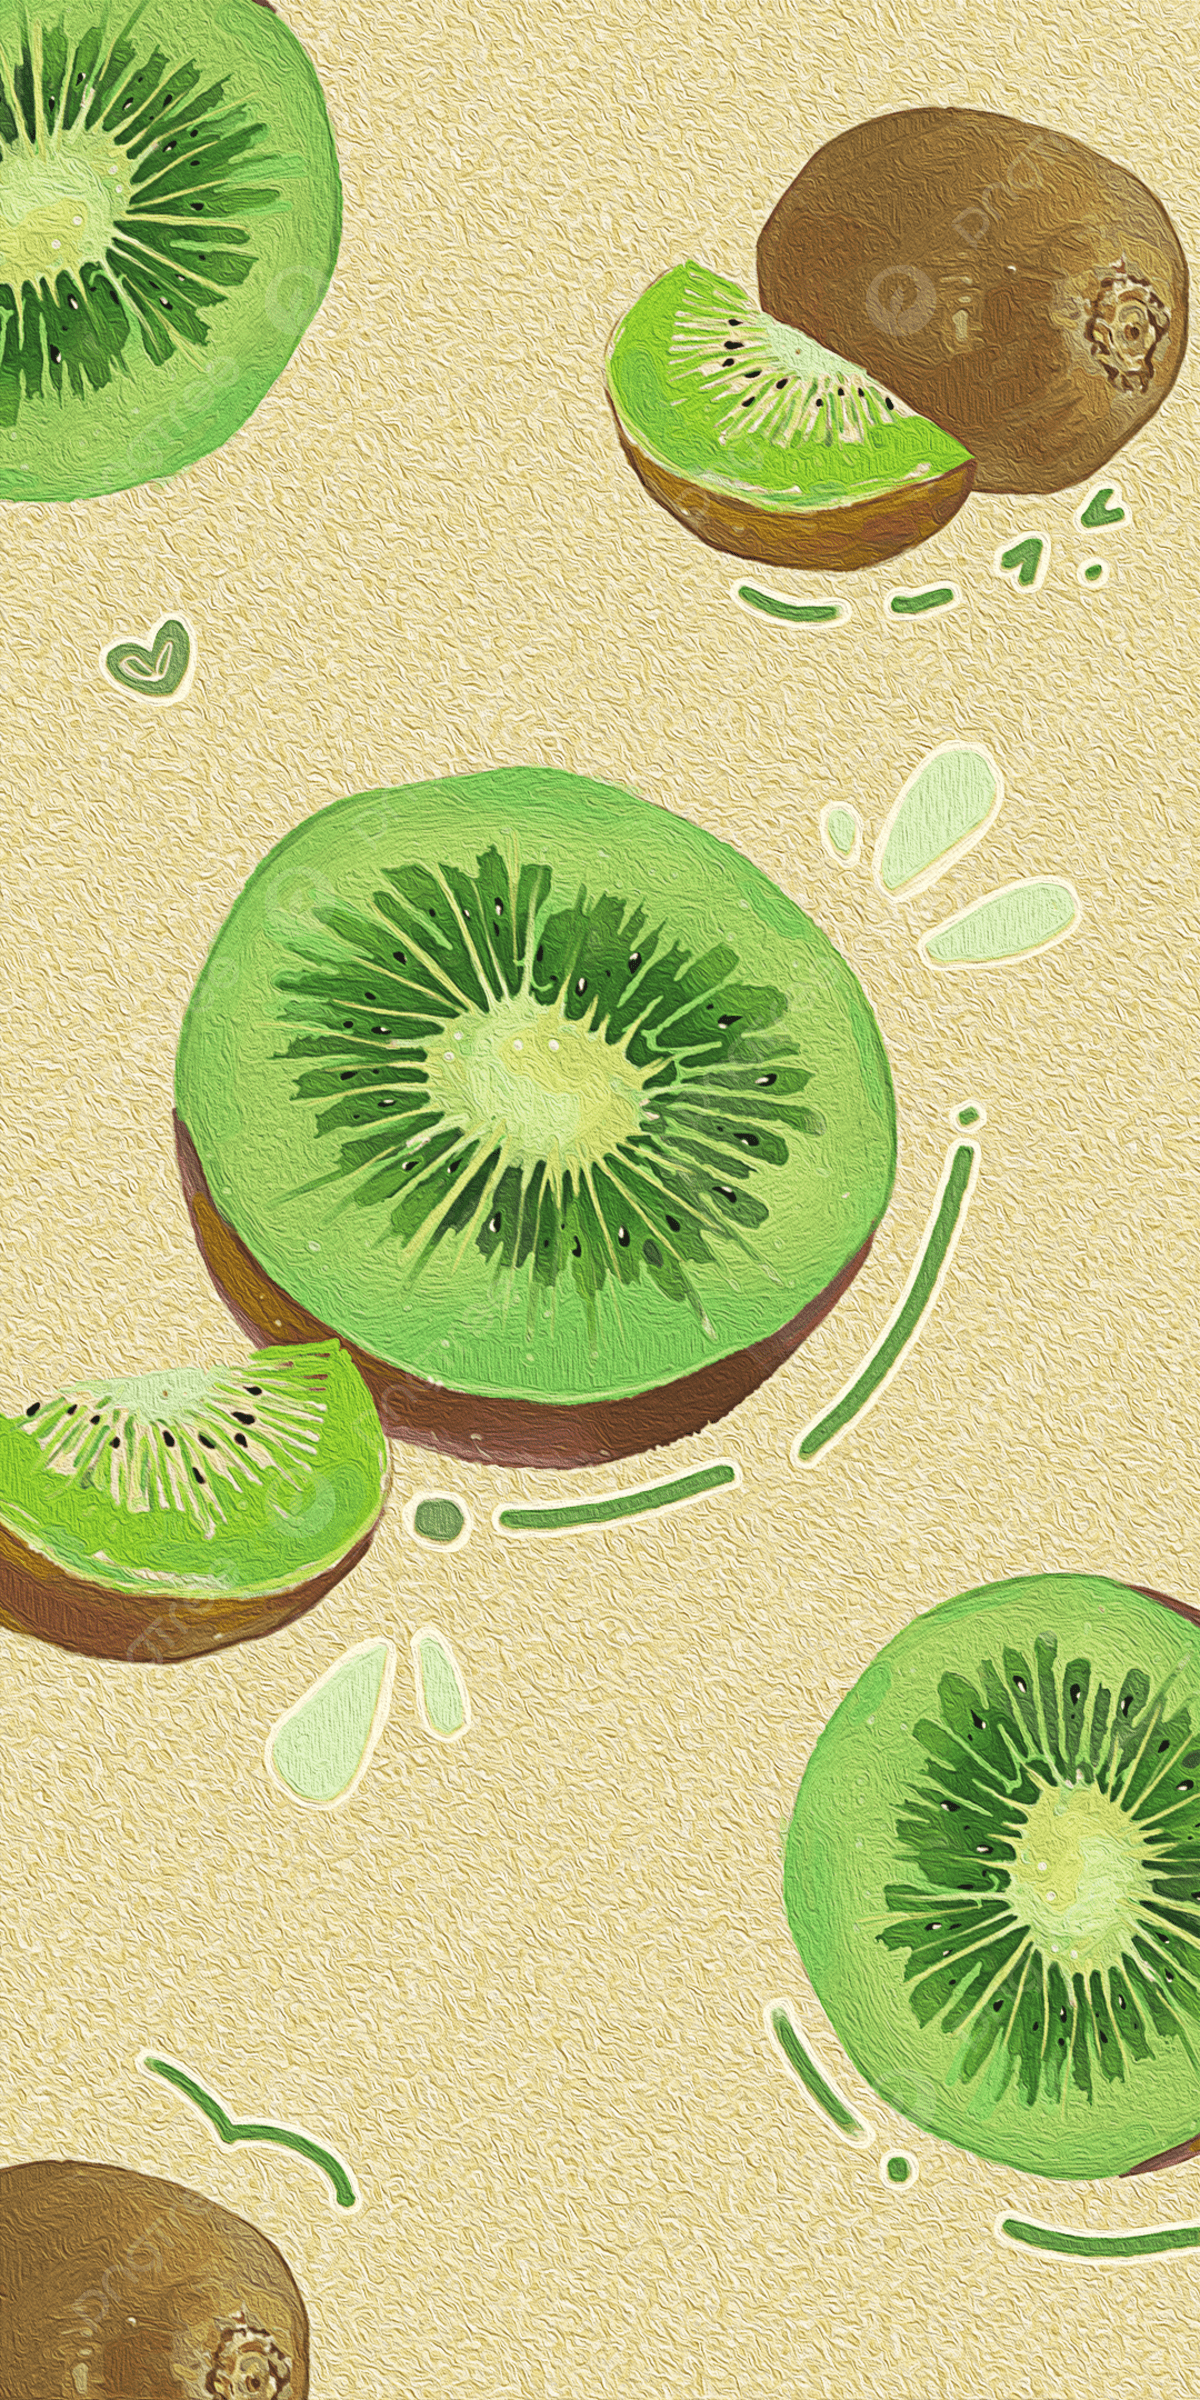 Cute Kiwi Mobile Wallpaper Background Wallpaper Image For Free Download